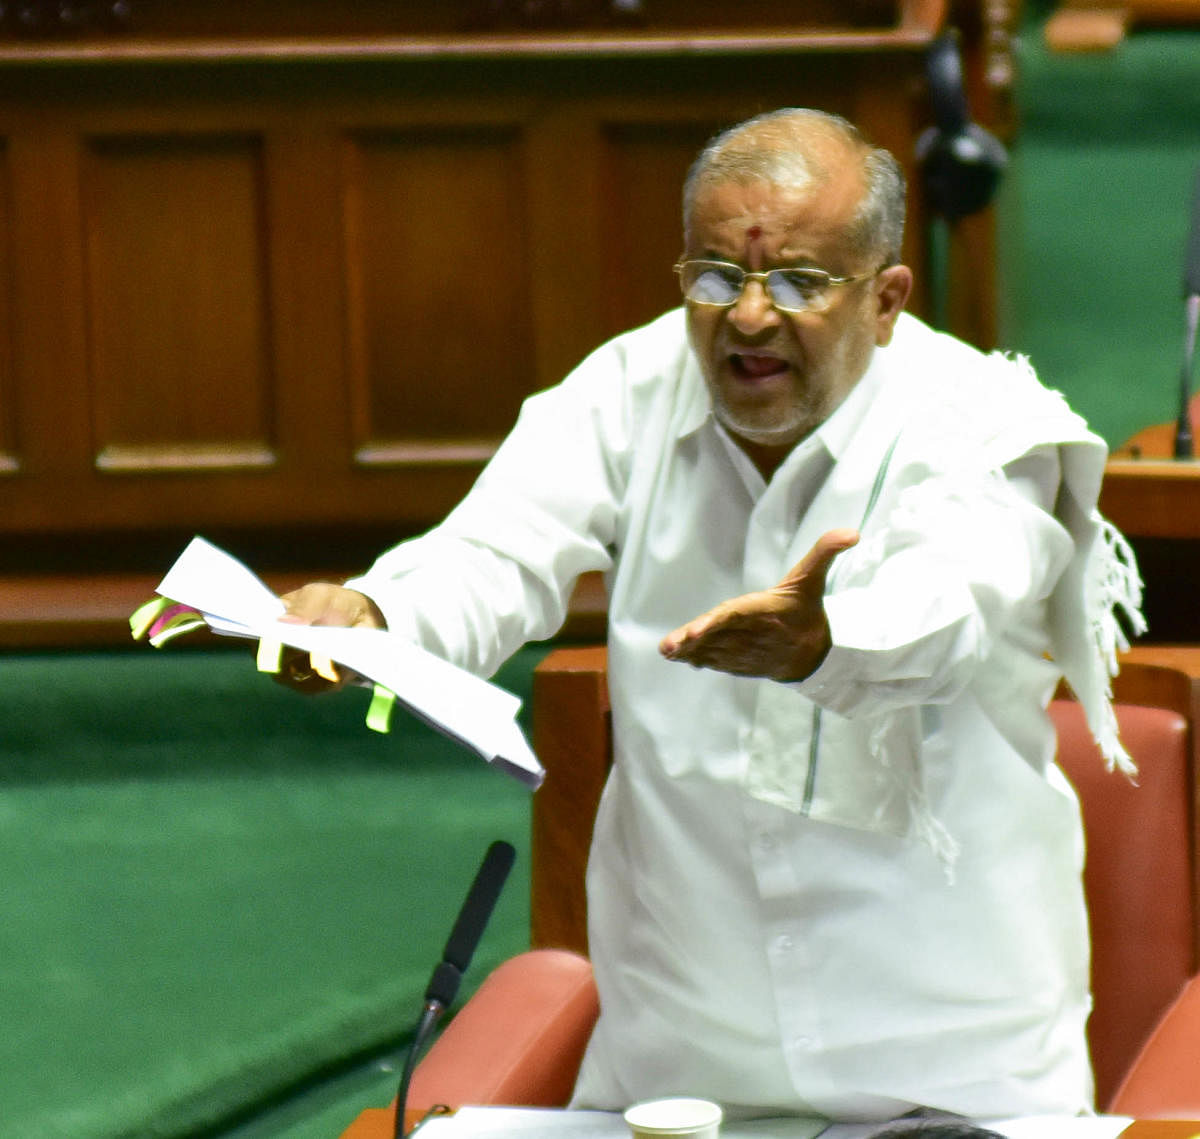 Devegowda paid no heed to Siddaramaiah’s letter, and went on to say that it was common for a new government to change nominated members.